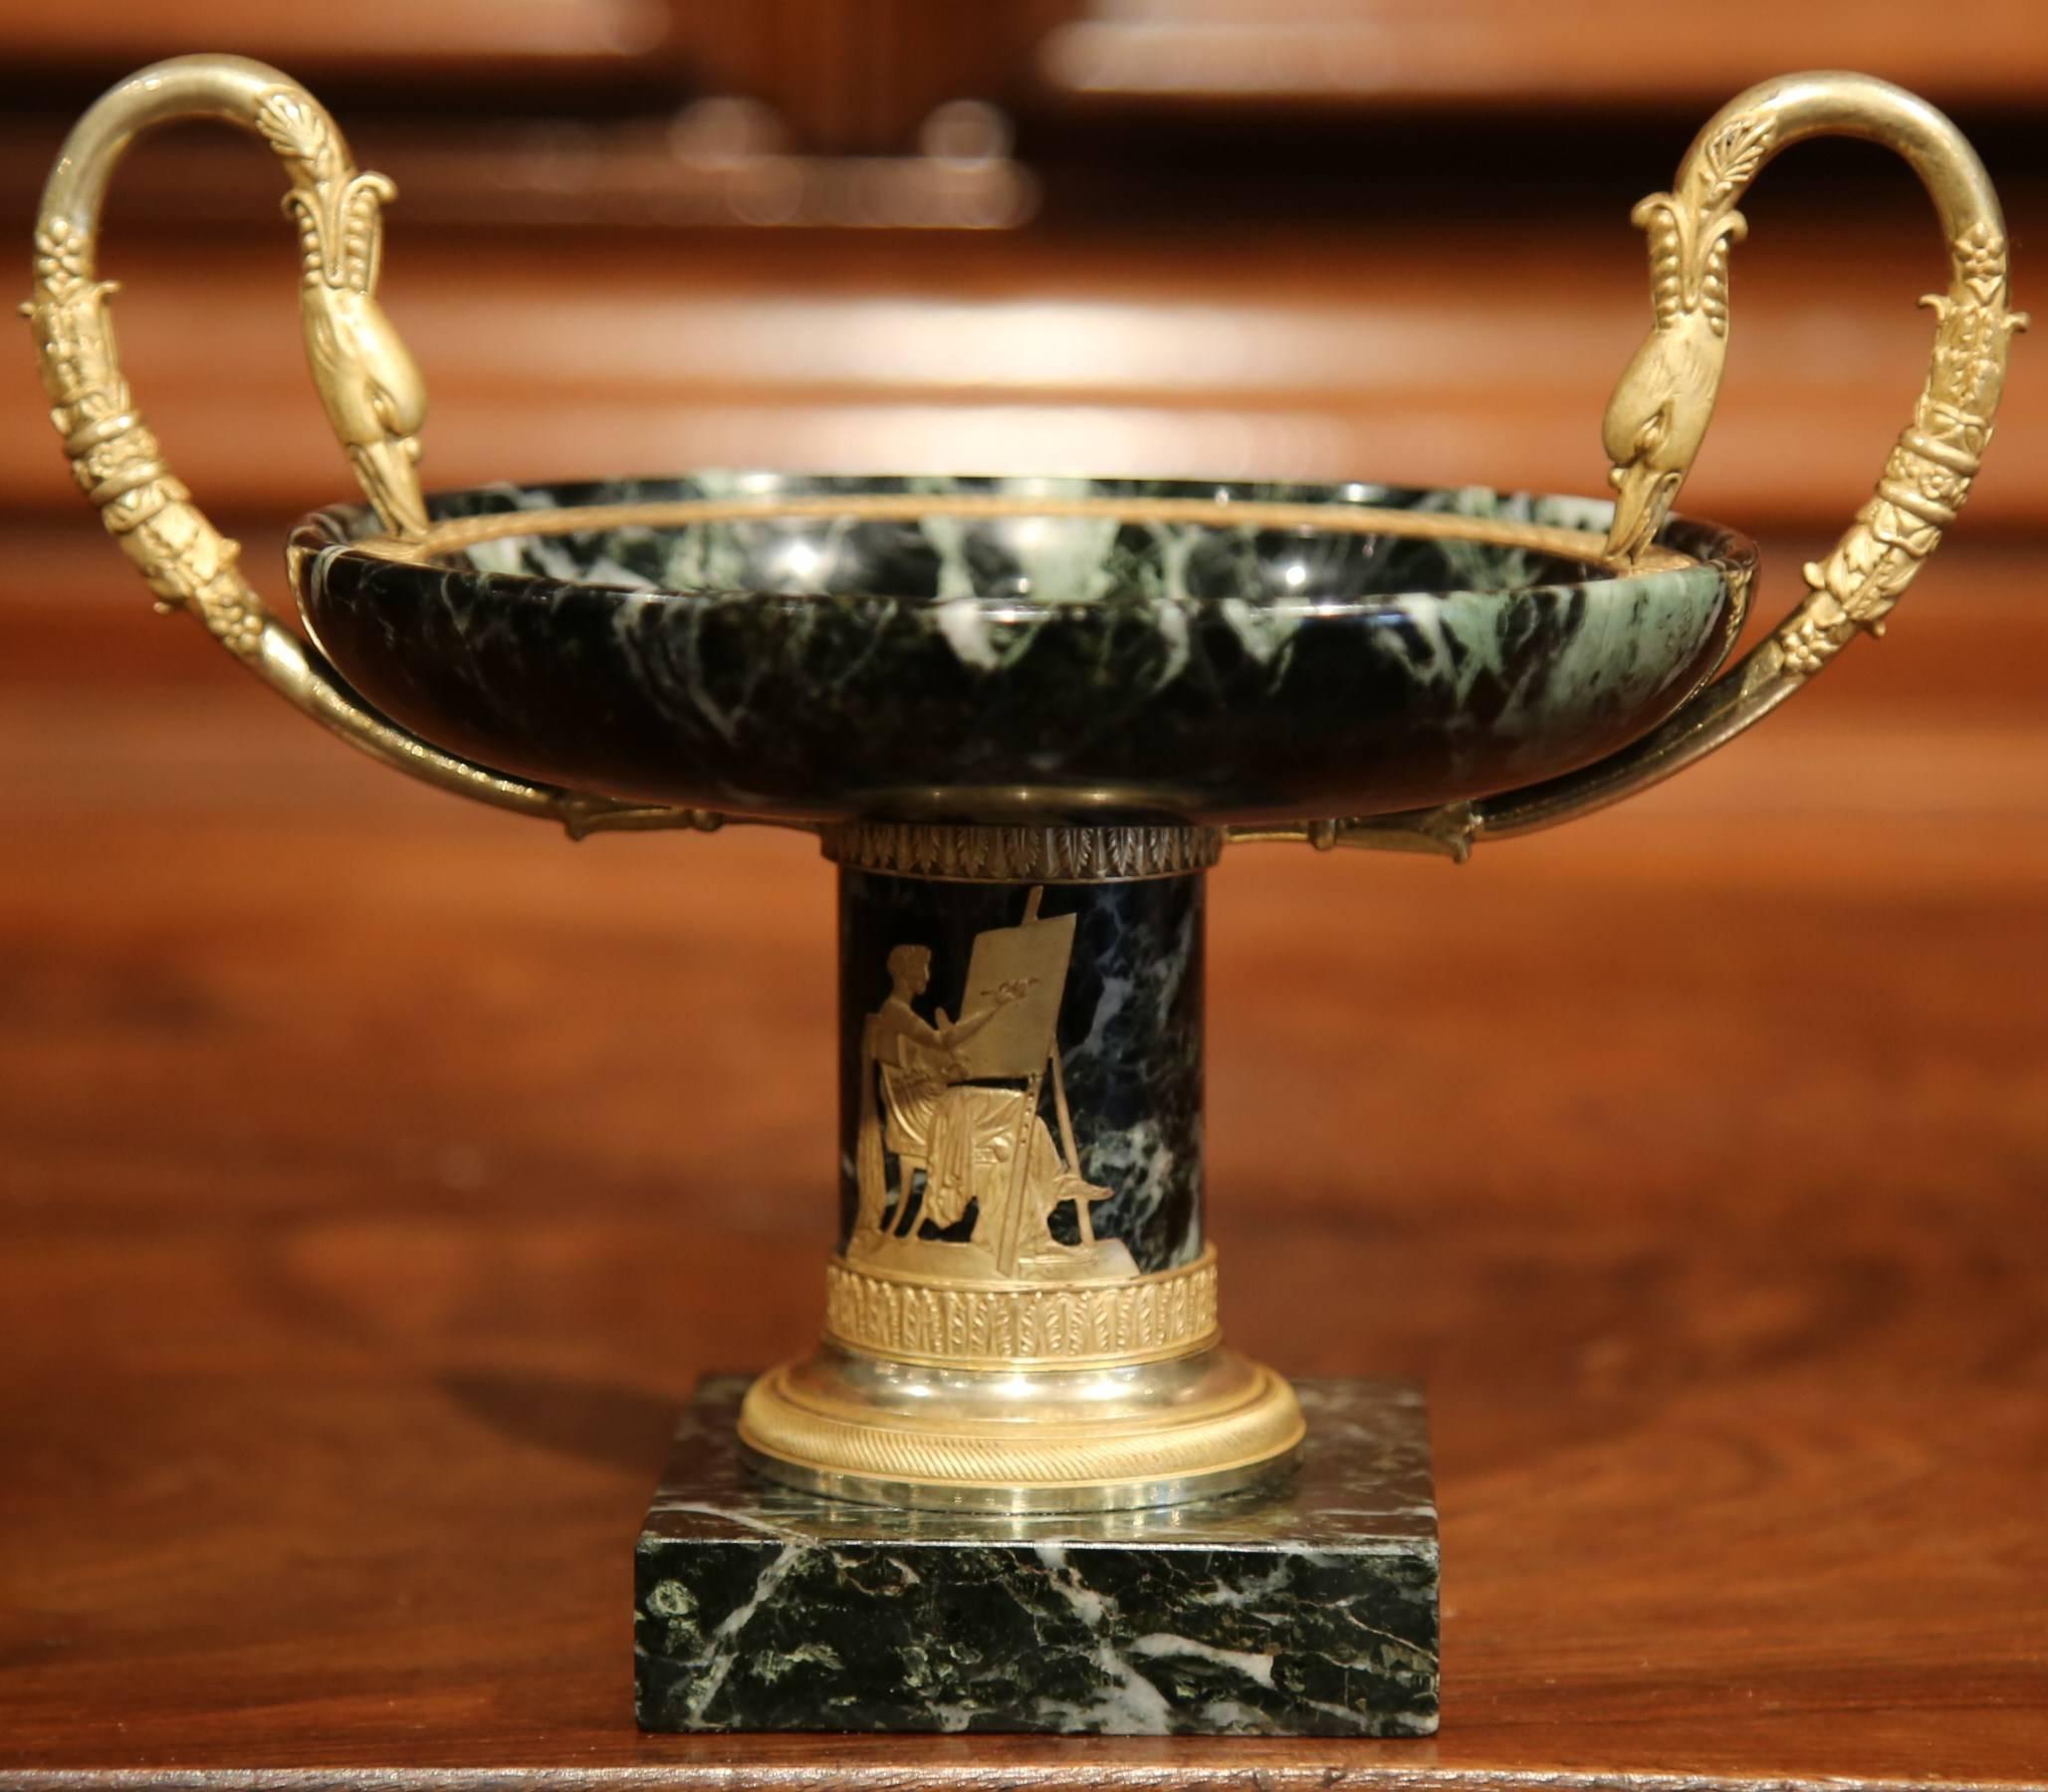 Place this elegant decorative dish or vide-poche on your office desk to catch odds and ends. Crafted in France circa 1880, the green marble dish has two brass swan handles and a decorative Roman chariot with horses mounted inside the bowl. The